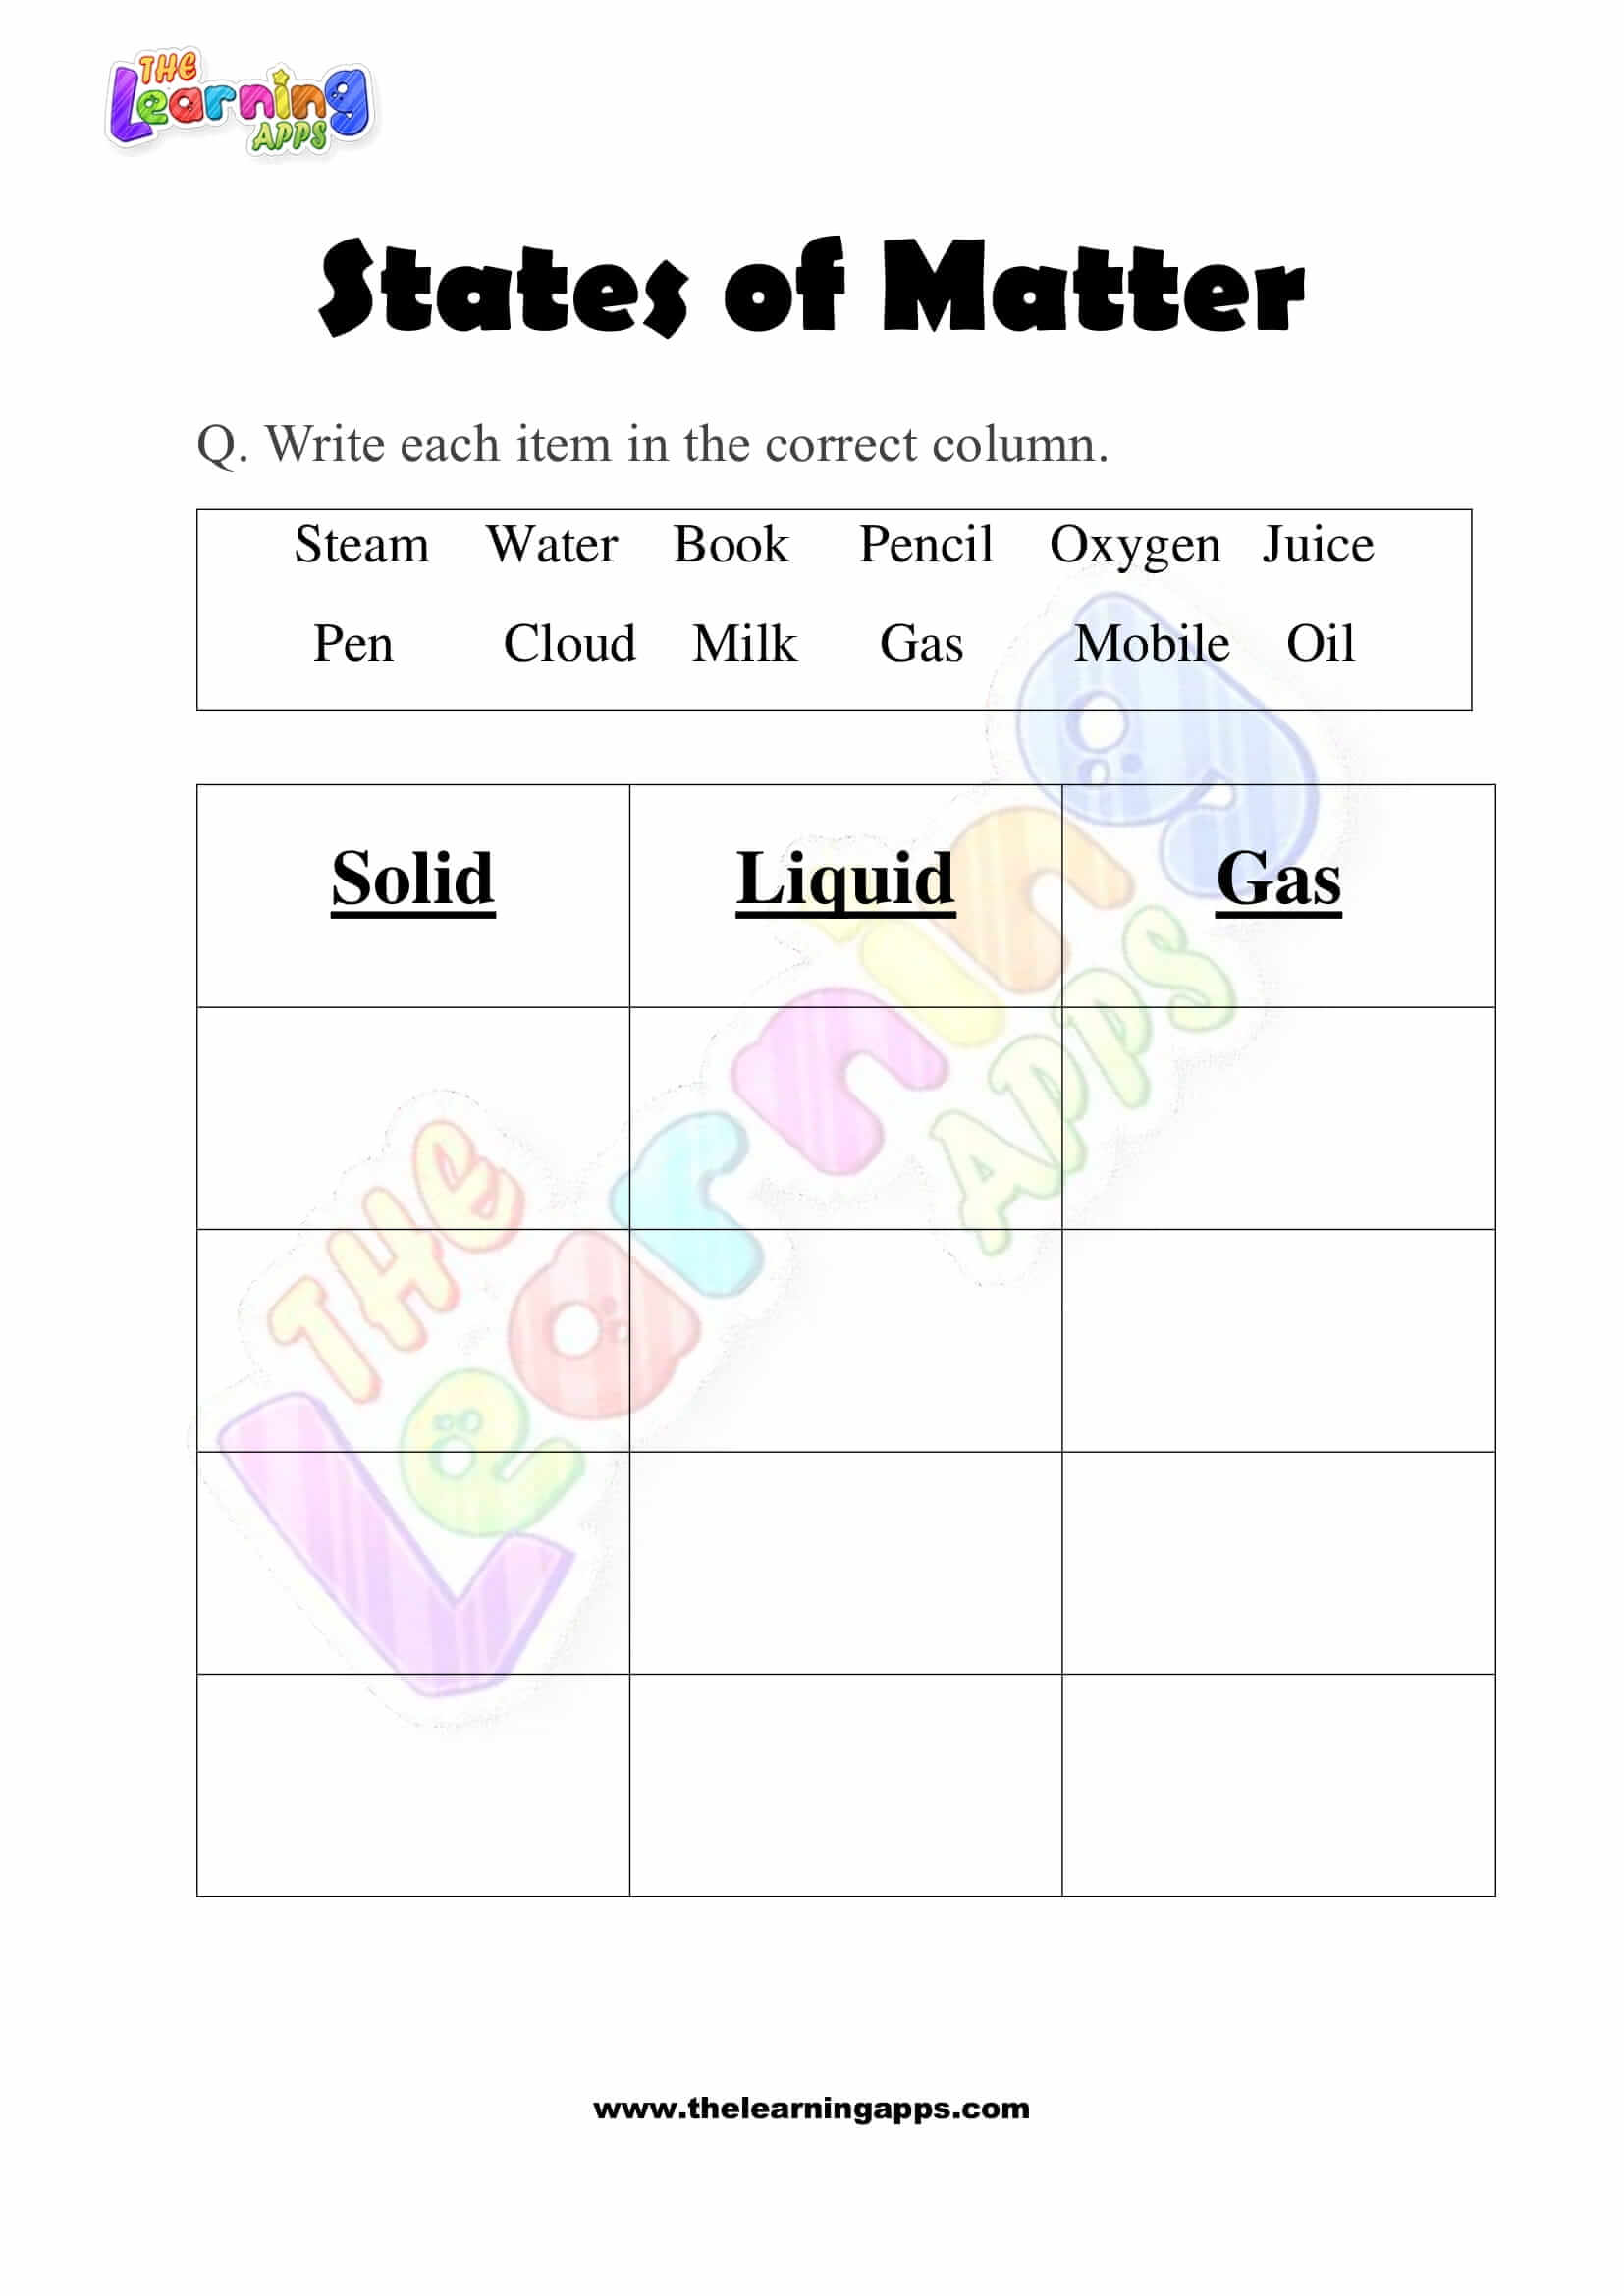 States-of-Matter-Worksheet-for-Grade-Two-Activity-03